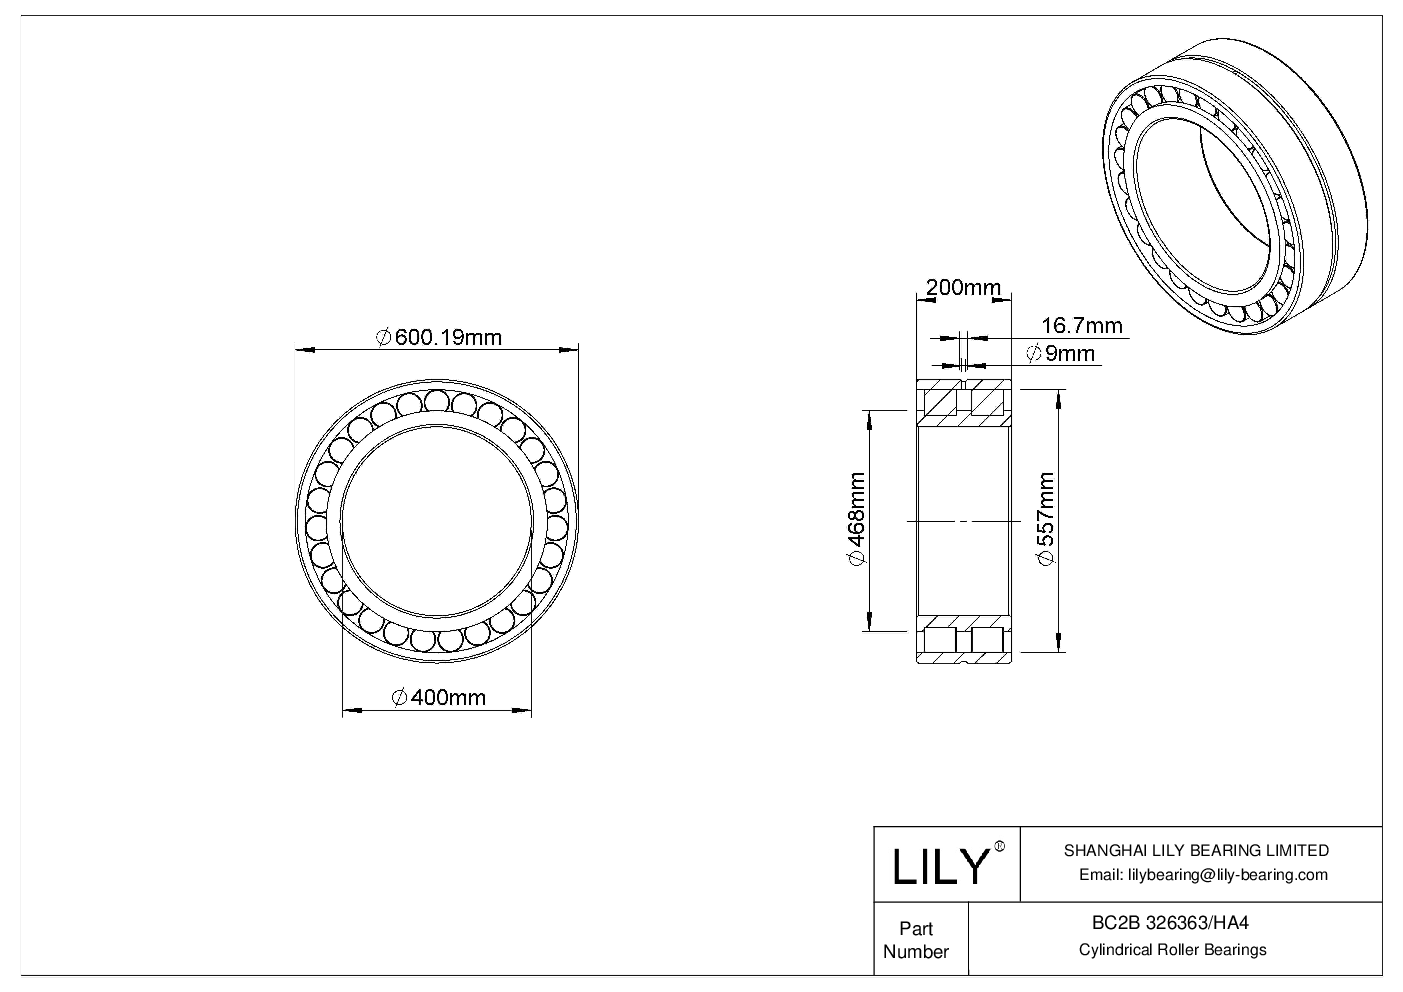 BC2B 326363/HA4 Double Row Cylindrical Roller Bearings cad drawing